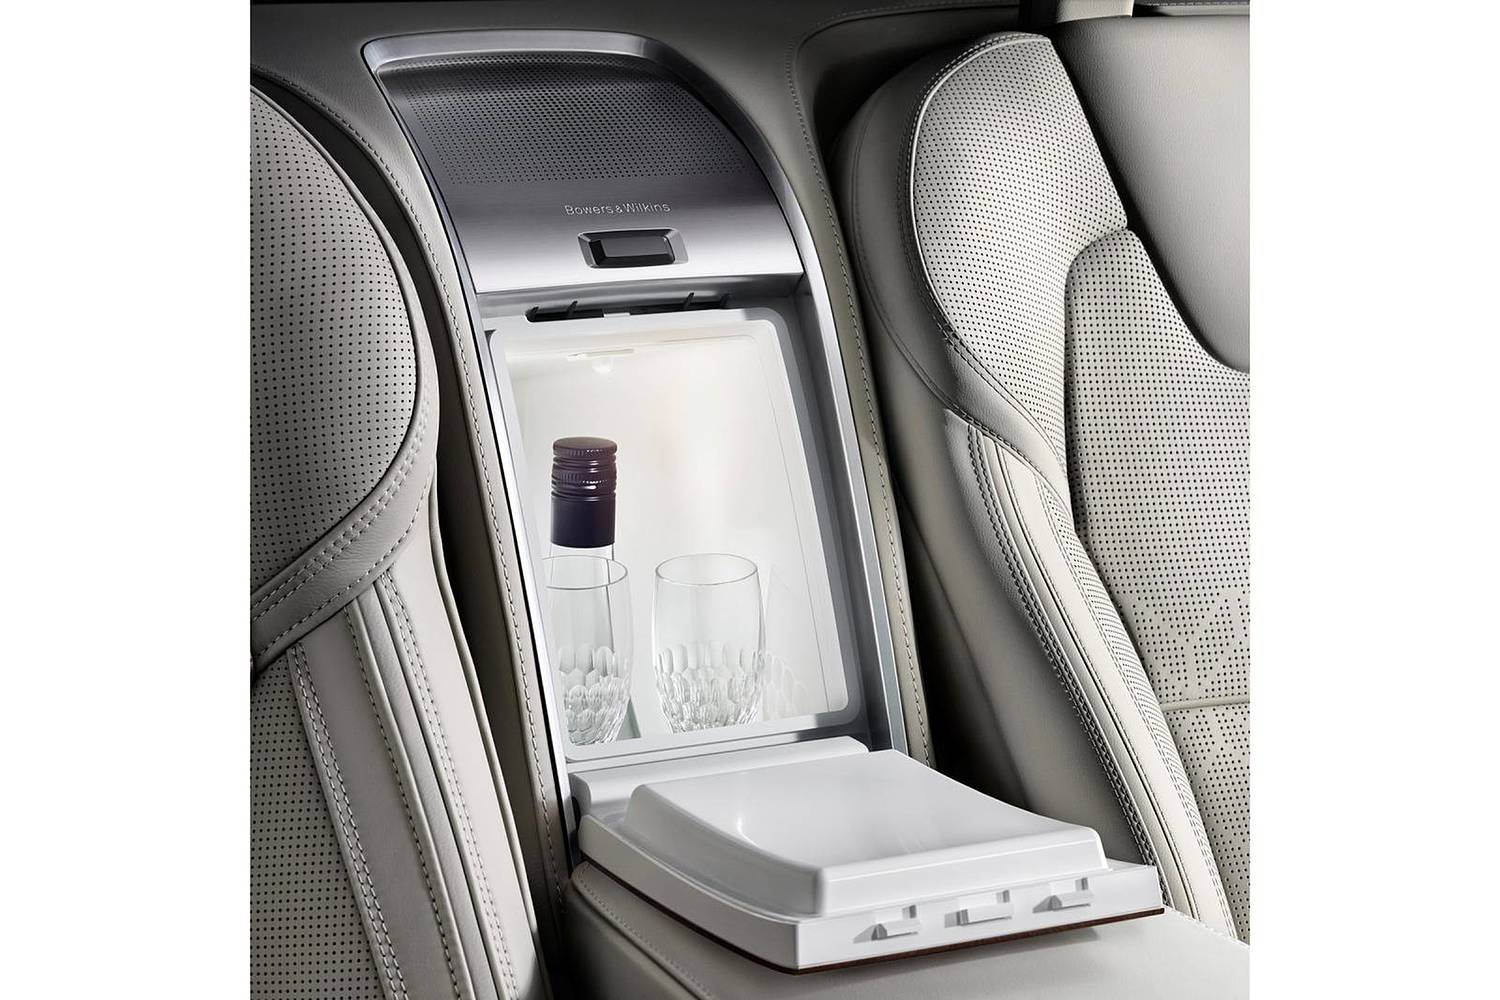 Volvo XC90 T8 Excellence Twin Engine Plug-In Hybrid 4dr SUV Interior Detail (2017 model year shown)